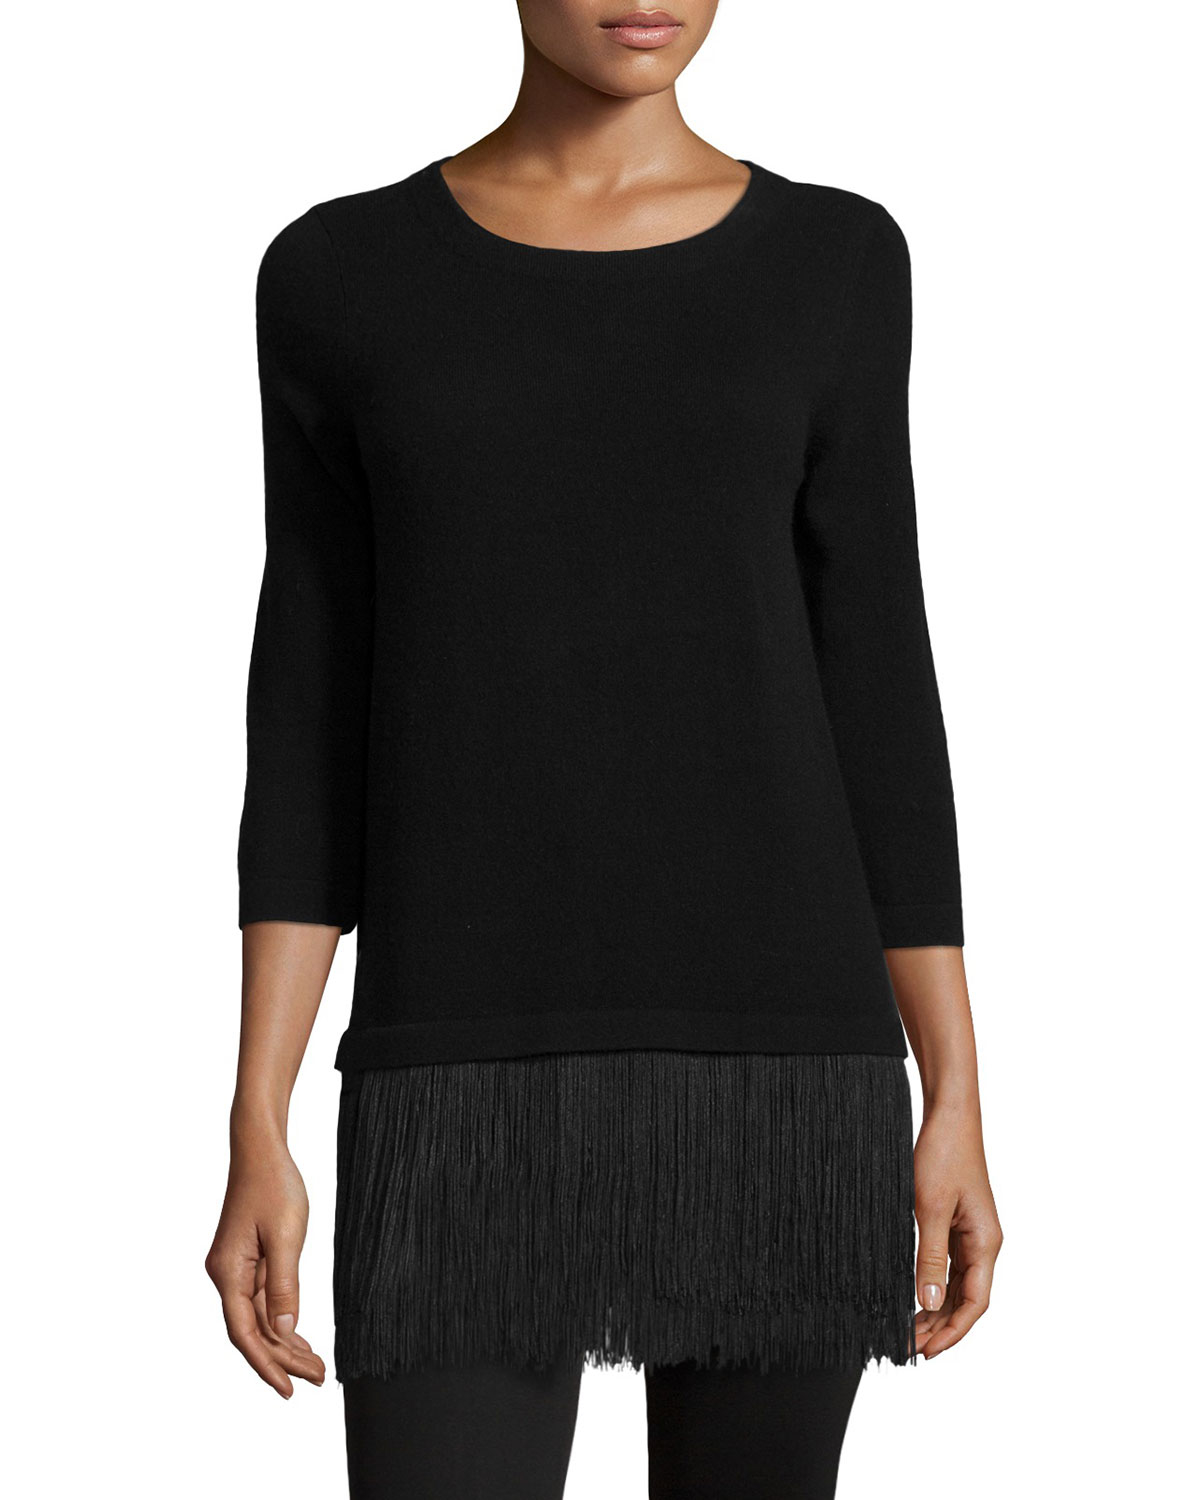 Neiman marcus cashmere collection Cashmere Sweater With Fringe in Black